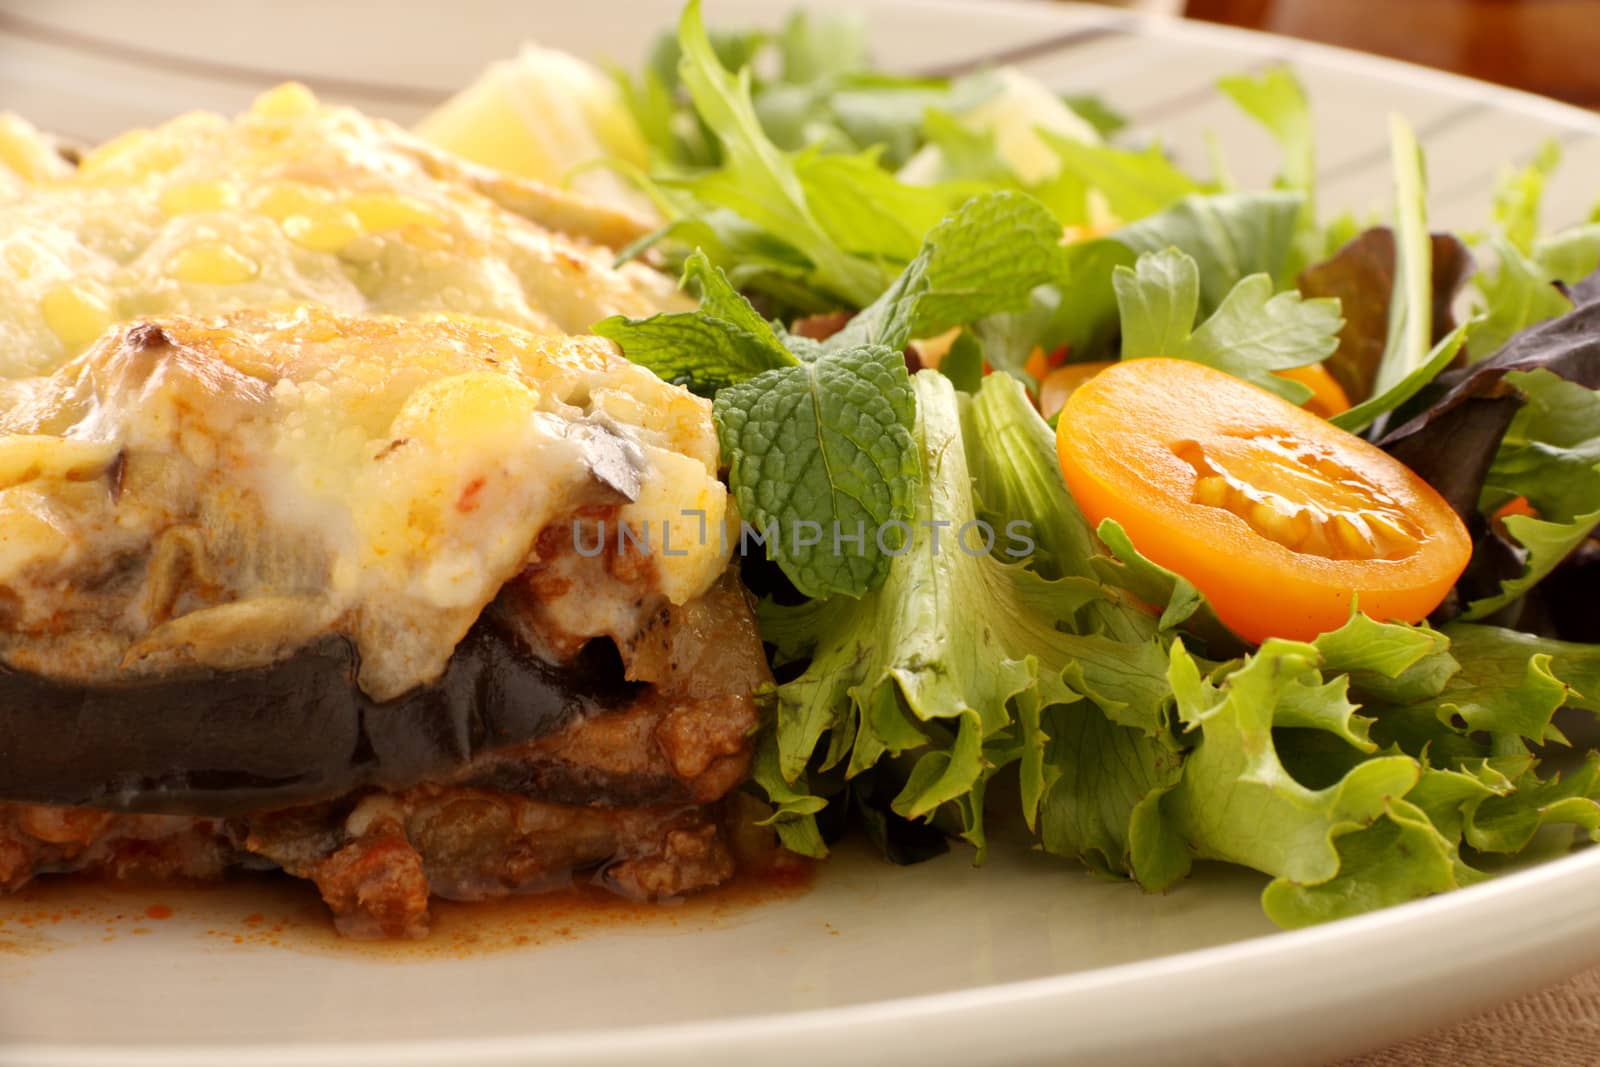 Delicious Greek moussaka with aubergine and a side garden salad.